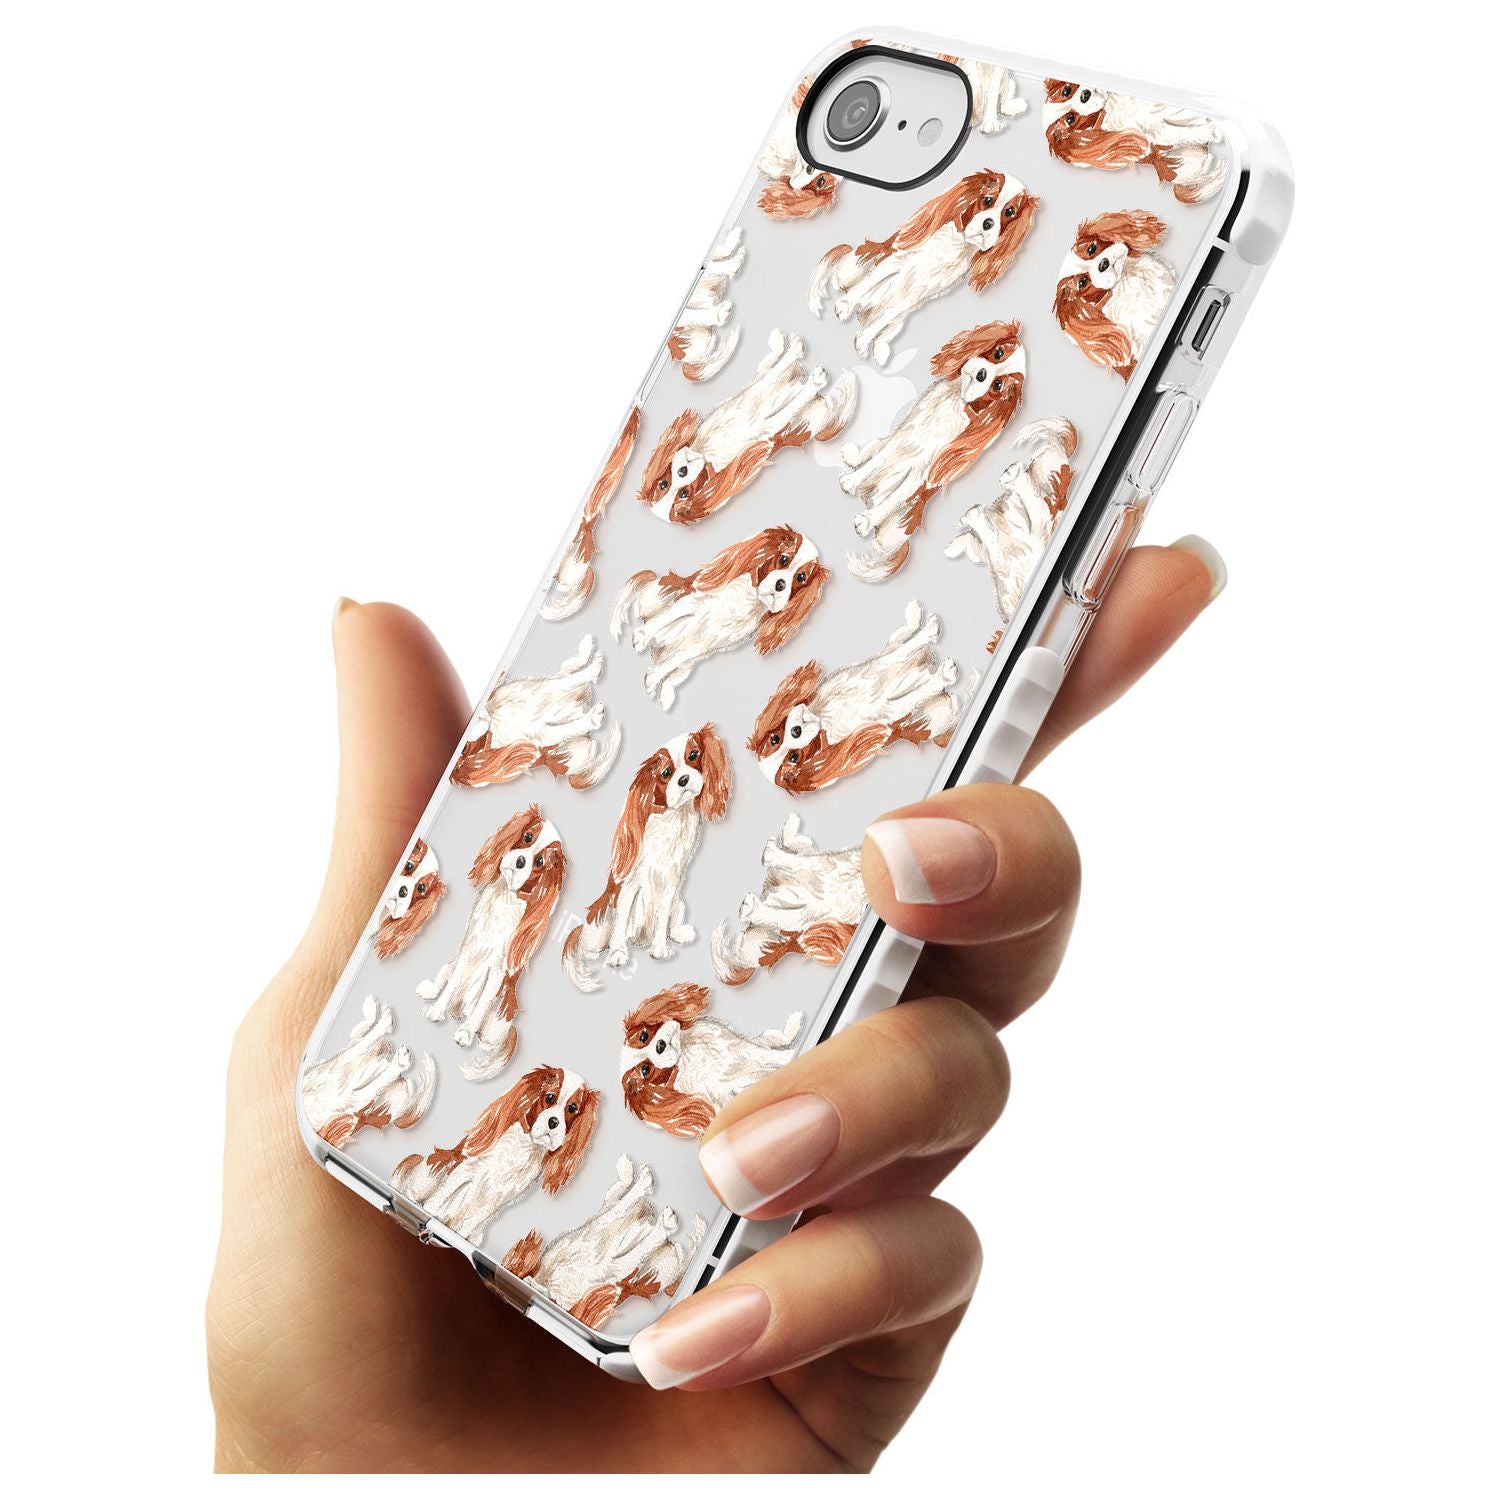 Cavalier King Charles Spaniel Dog Pattern Impact Phone Case for iPhone SE 8 7 Plus